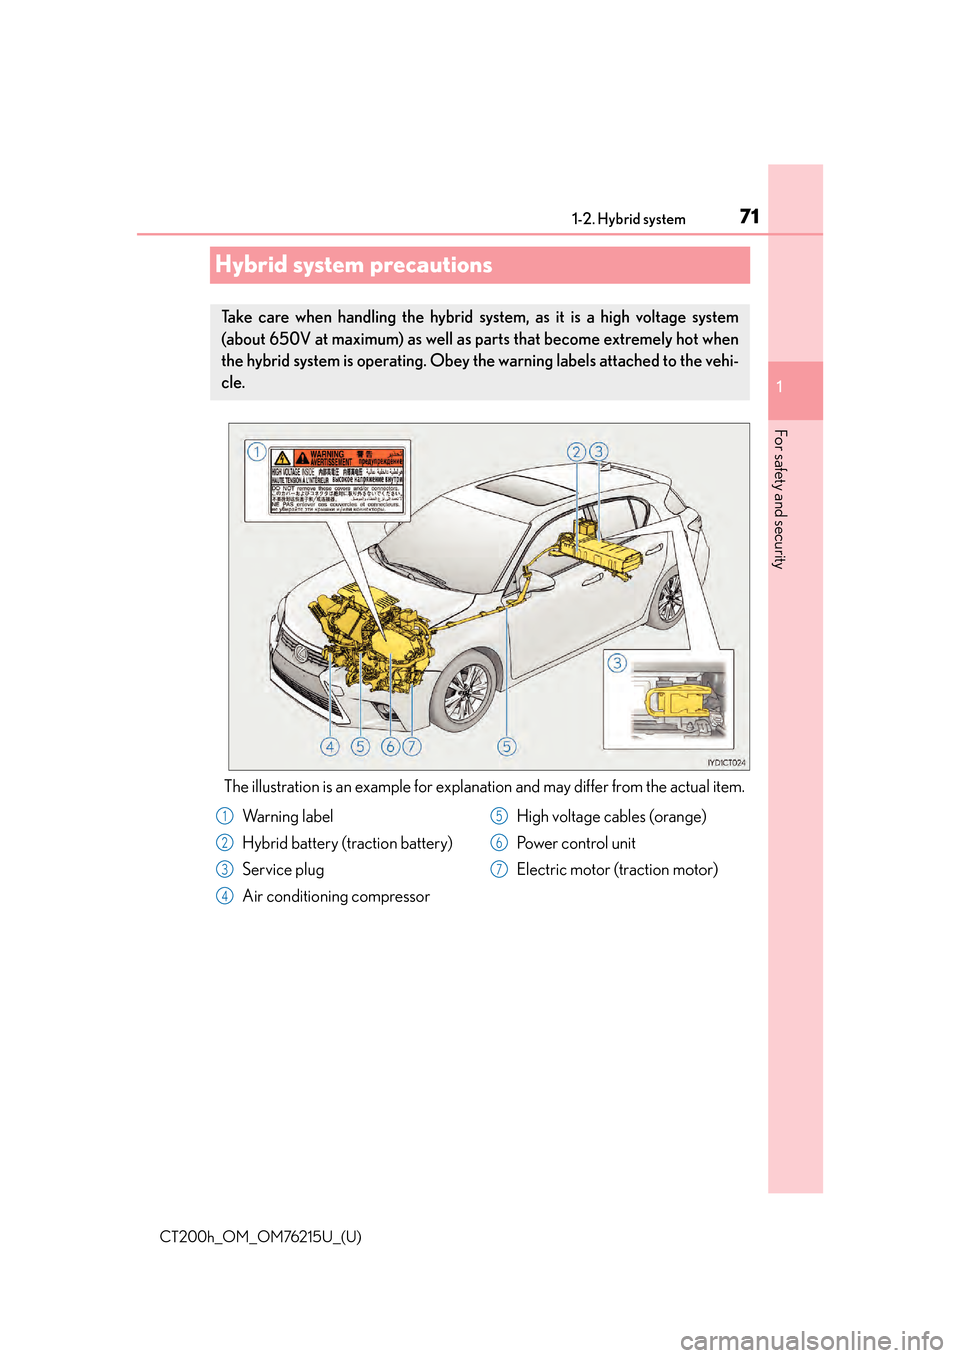 Lexus CT200h 2017  Owners Manual (in English) 711-2. Hybrid system
CT200h_OM_OM76215U_(U)
1
For safety and security
Hybrid system precautions
The illustration is an example for explanation and may differ from the actual item.
Take care when handl